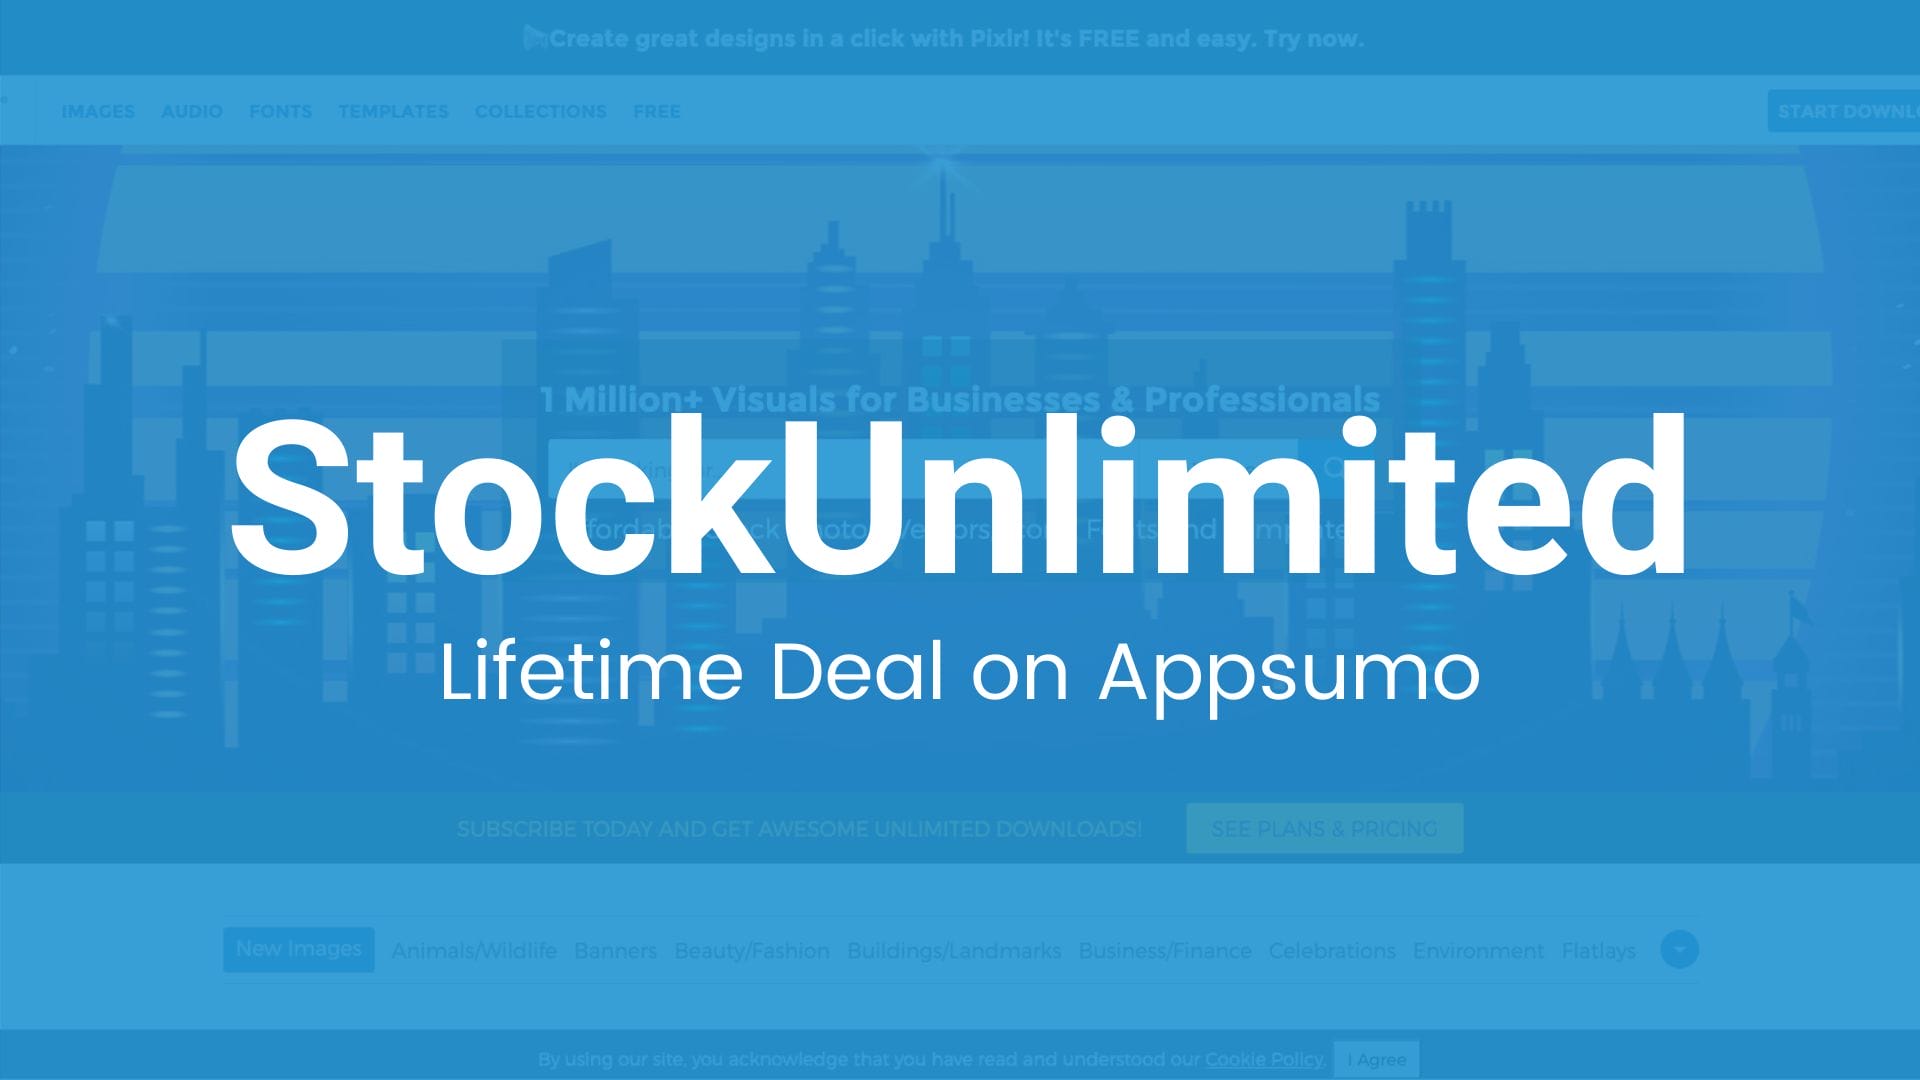 StockUnlimited: An Endless Library of Stock Content